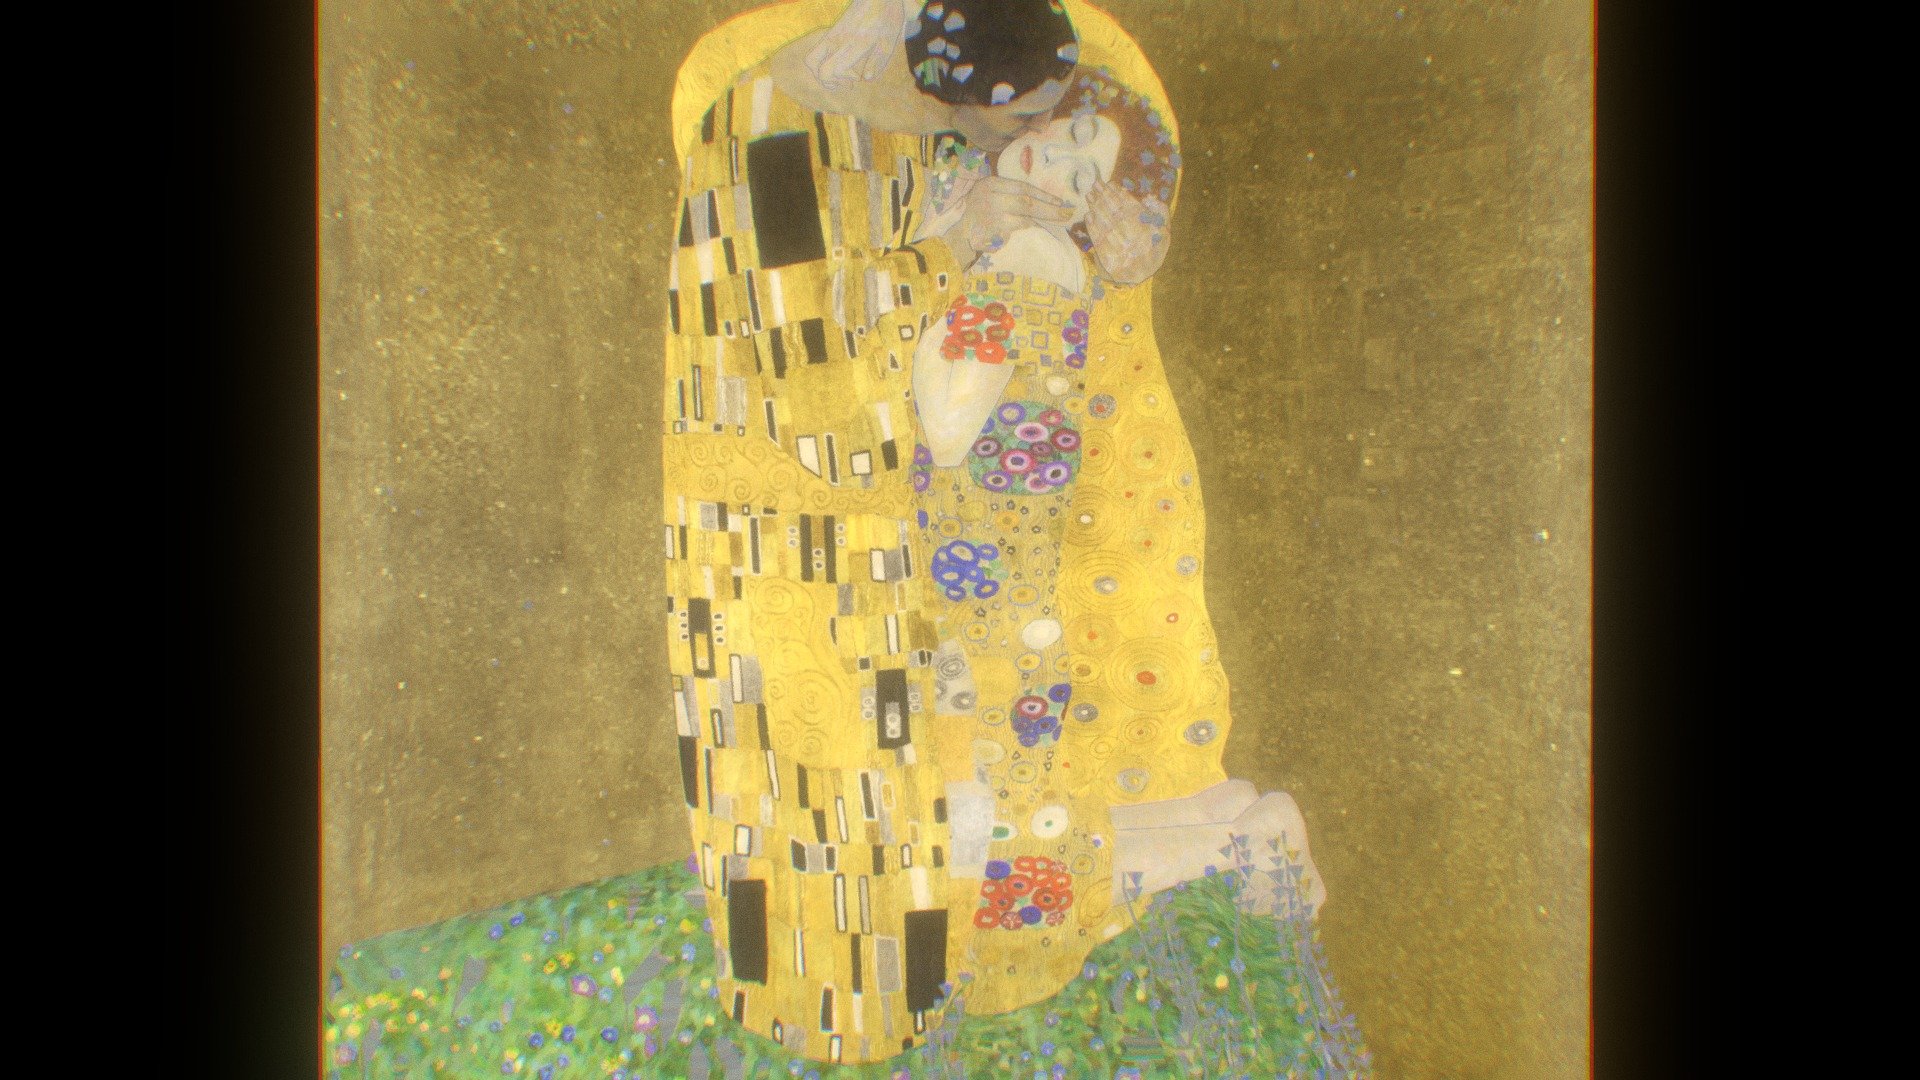 This is a tribute to Austrian Symbolist painter Gustav Klimt (1862-1918), and one of his most iconic romantic painting, The Kiss (1907 - 1908).

The painting depicts a couple locked in intimacy, surrounded by shimmering, extravagant flat Art Nouveau styled pattern.

Trying to be faithful to the original painting while adding depth to push physical forms of the scene, to me it's important to breath life to the lovers, to let them embrace each others for an eternity of passion. (Source information and image linked from Wikipedia and Österreichische Galerie Belvedere.)

 - The Kiss 3D - 3D model by hinxlinx 3d model